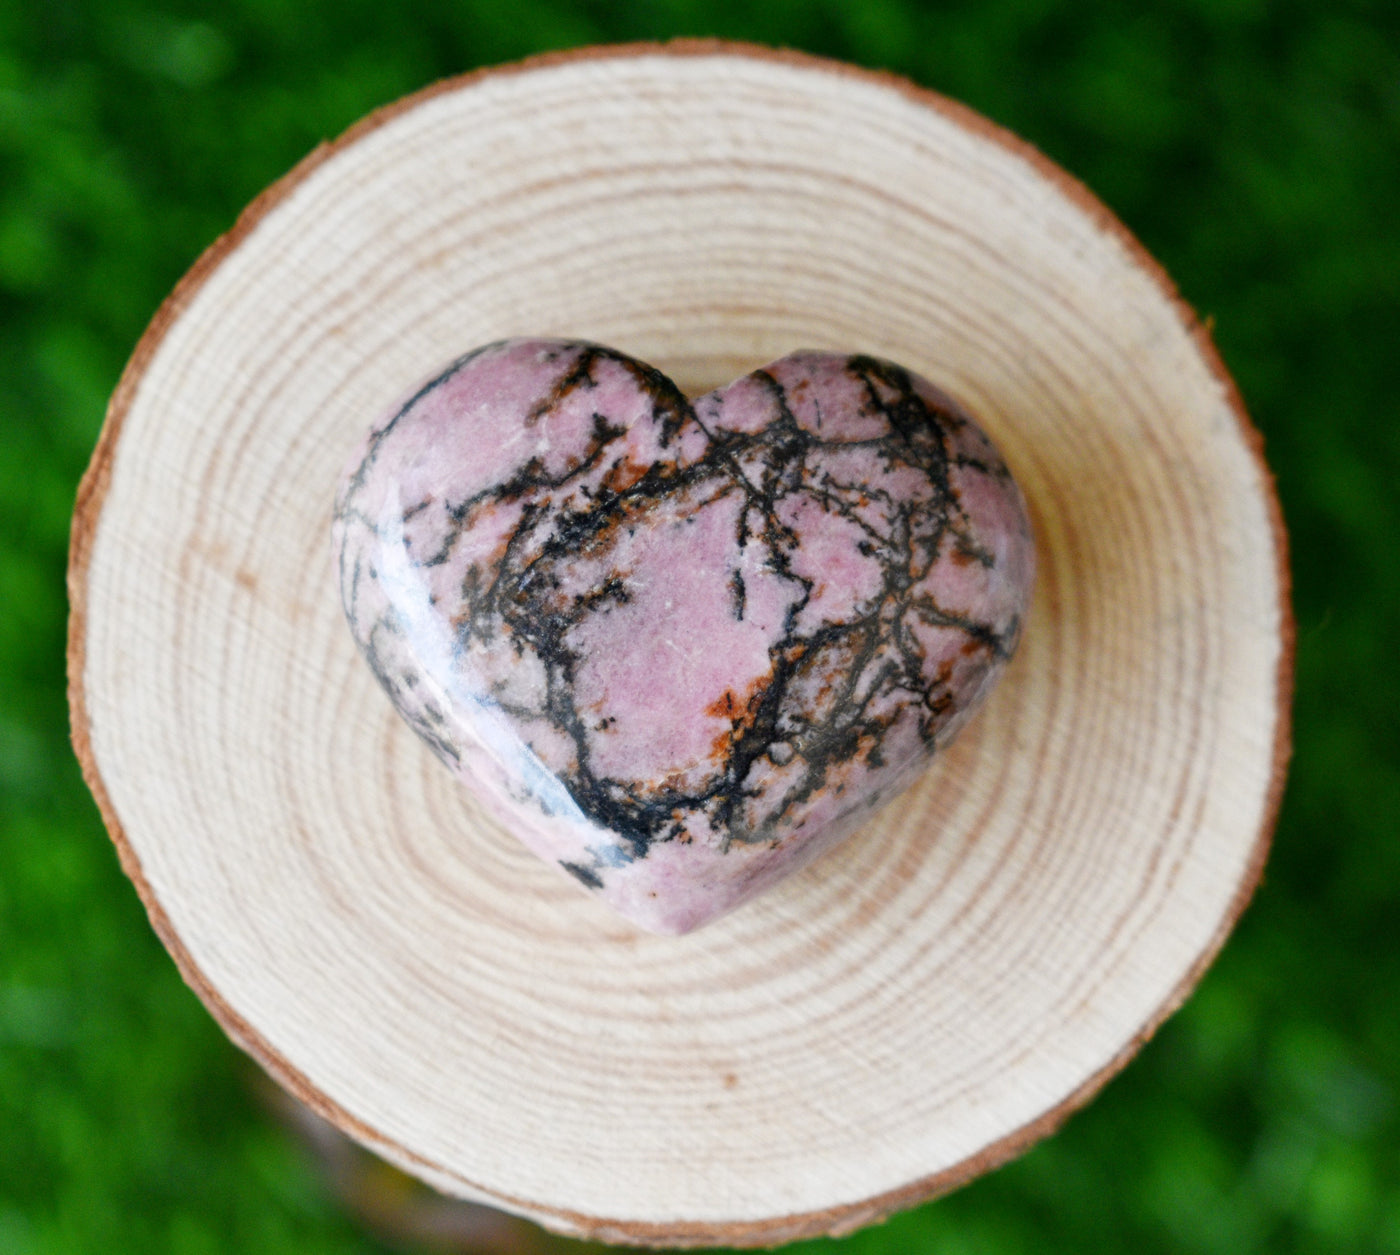 Polished Rhodonite Heart Crystal, 2 Inch Pocket Heart Large Puffy Crystal Heart